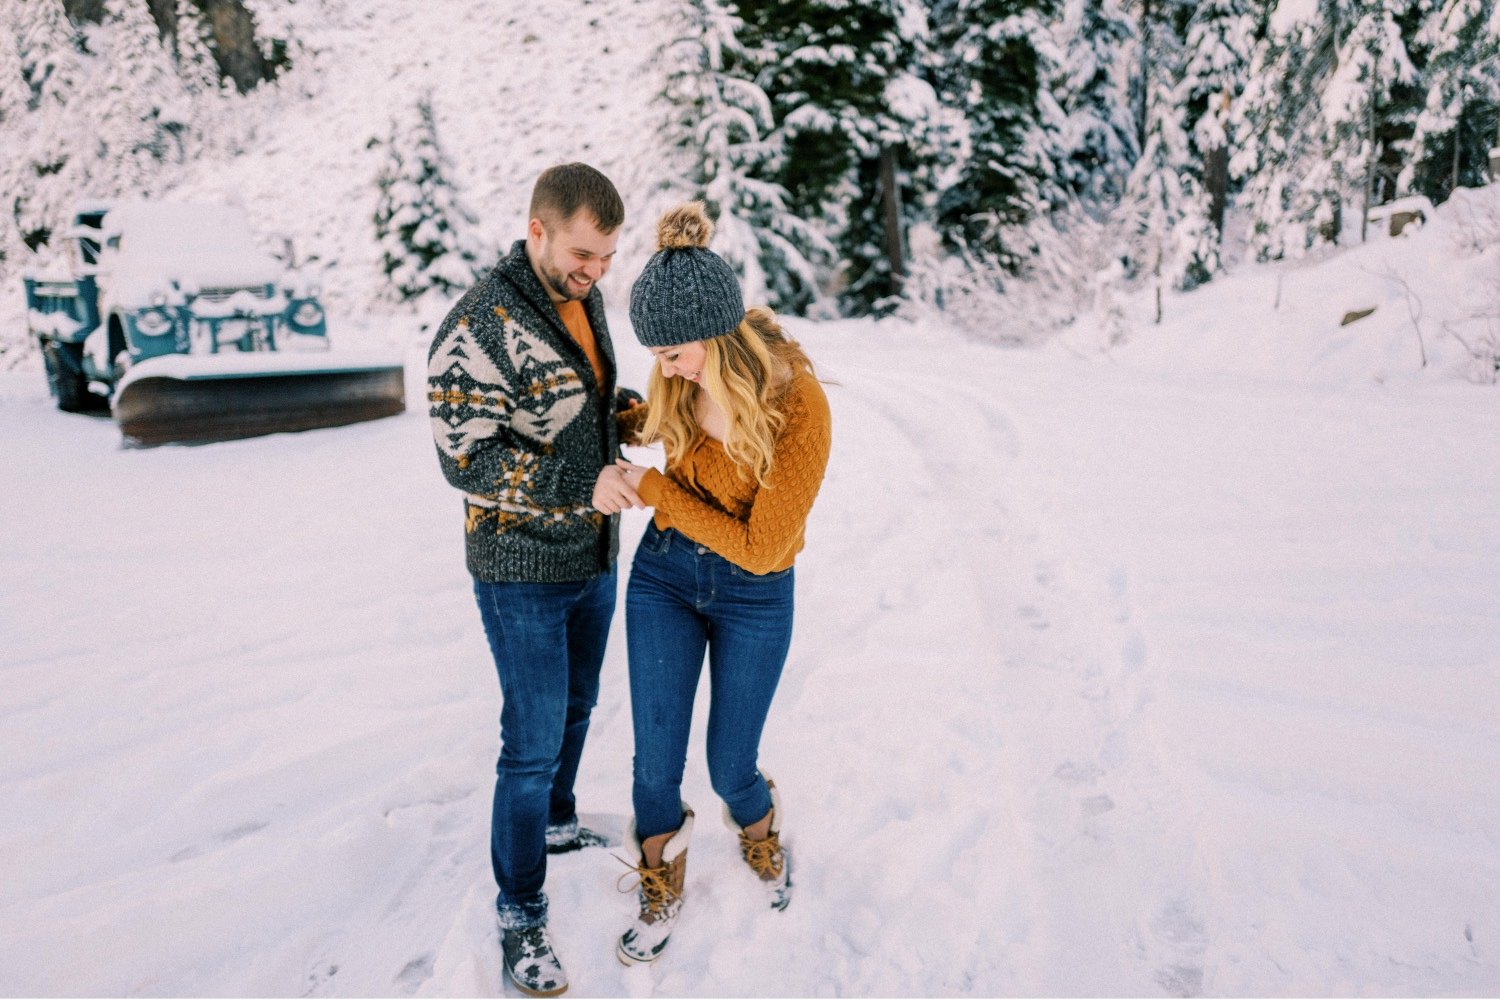 09_Snowy engagement photos at Snoqualmie Pass near Seattle, with a film-like style by Ryan Flynn Photography.jpg